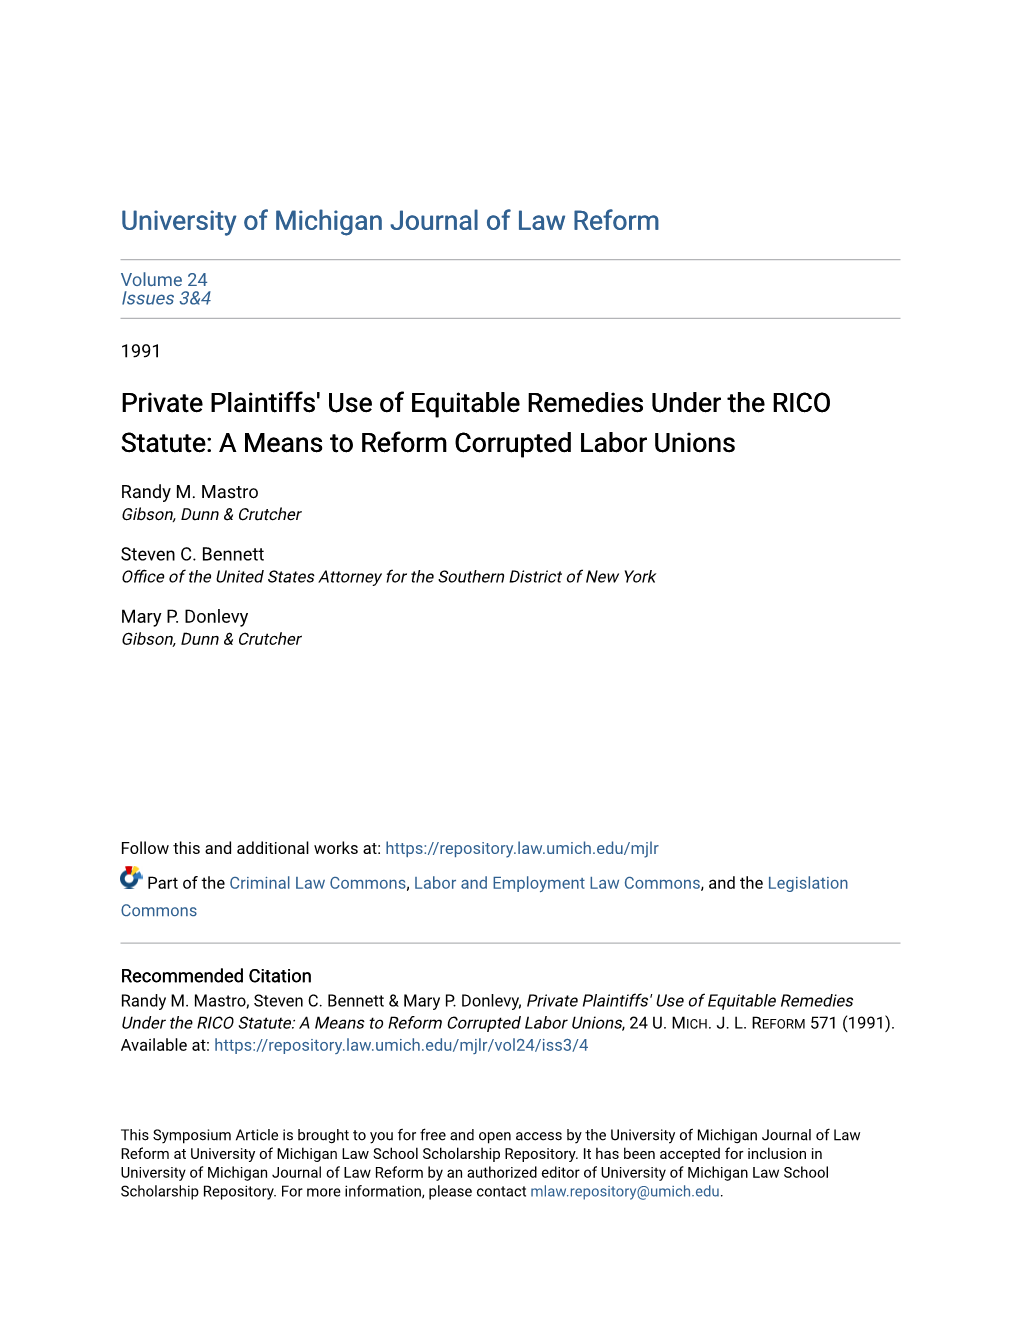 Private Plaintiffs' Use of Equitable Remedies Under the RICO Statute: a Means to Reform Corrupted Labor Unions